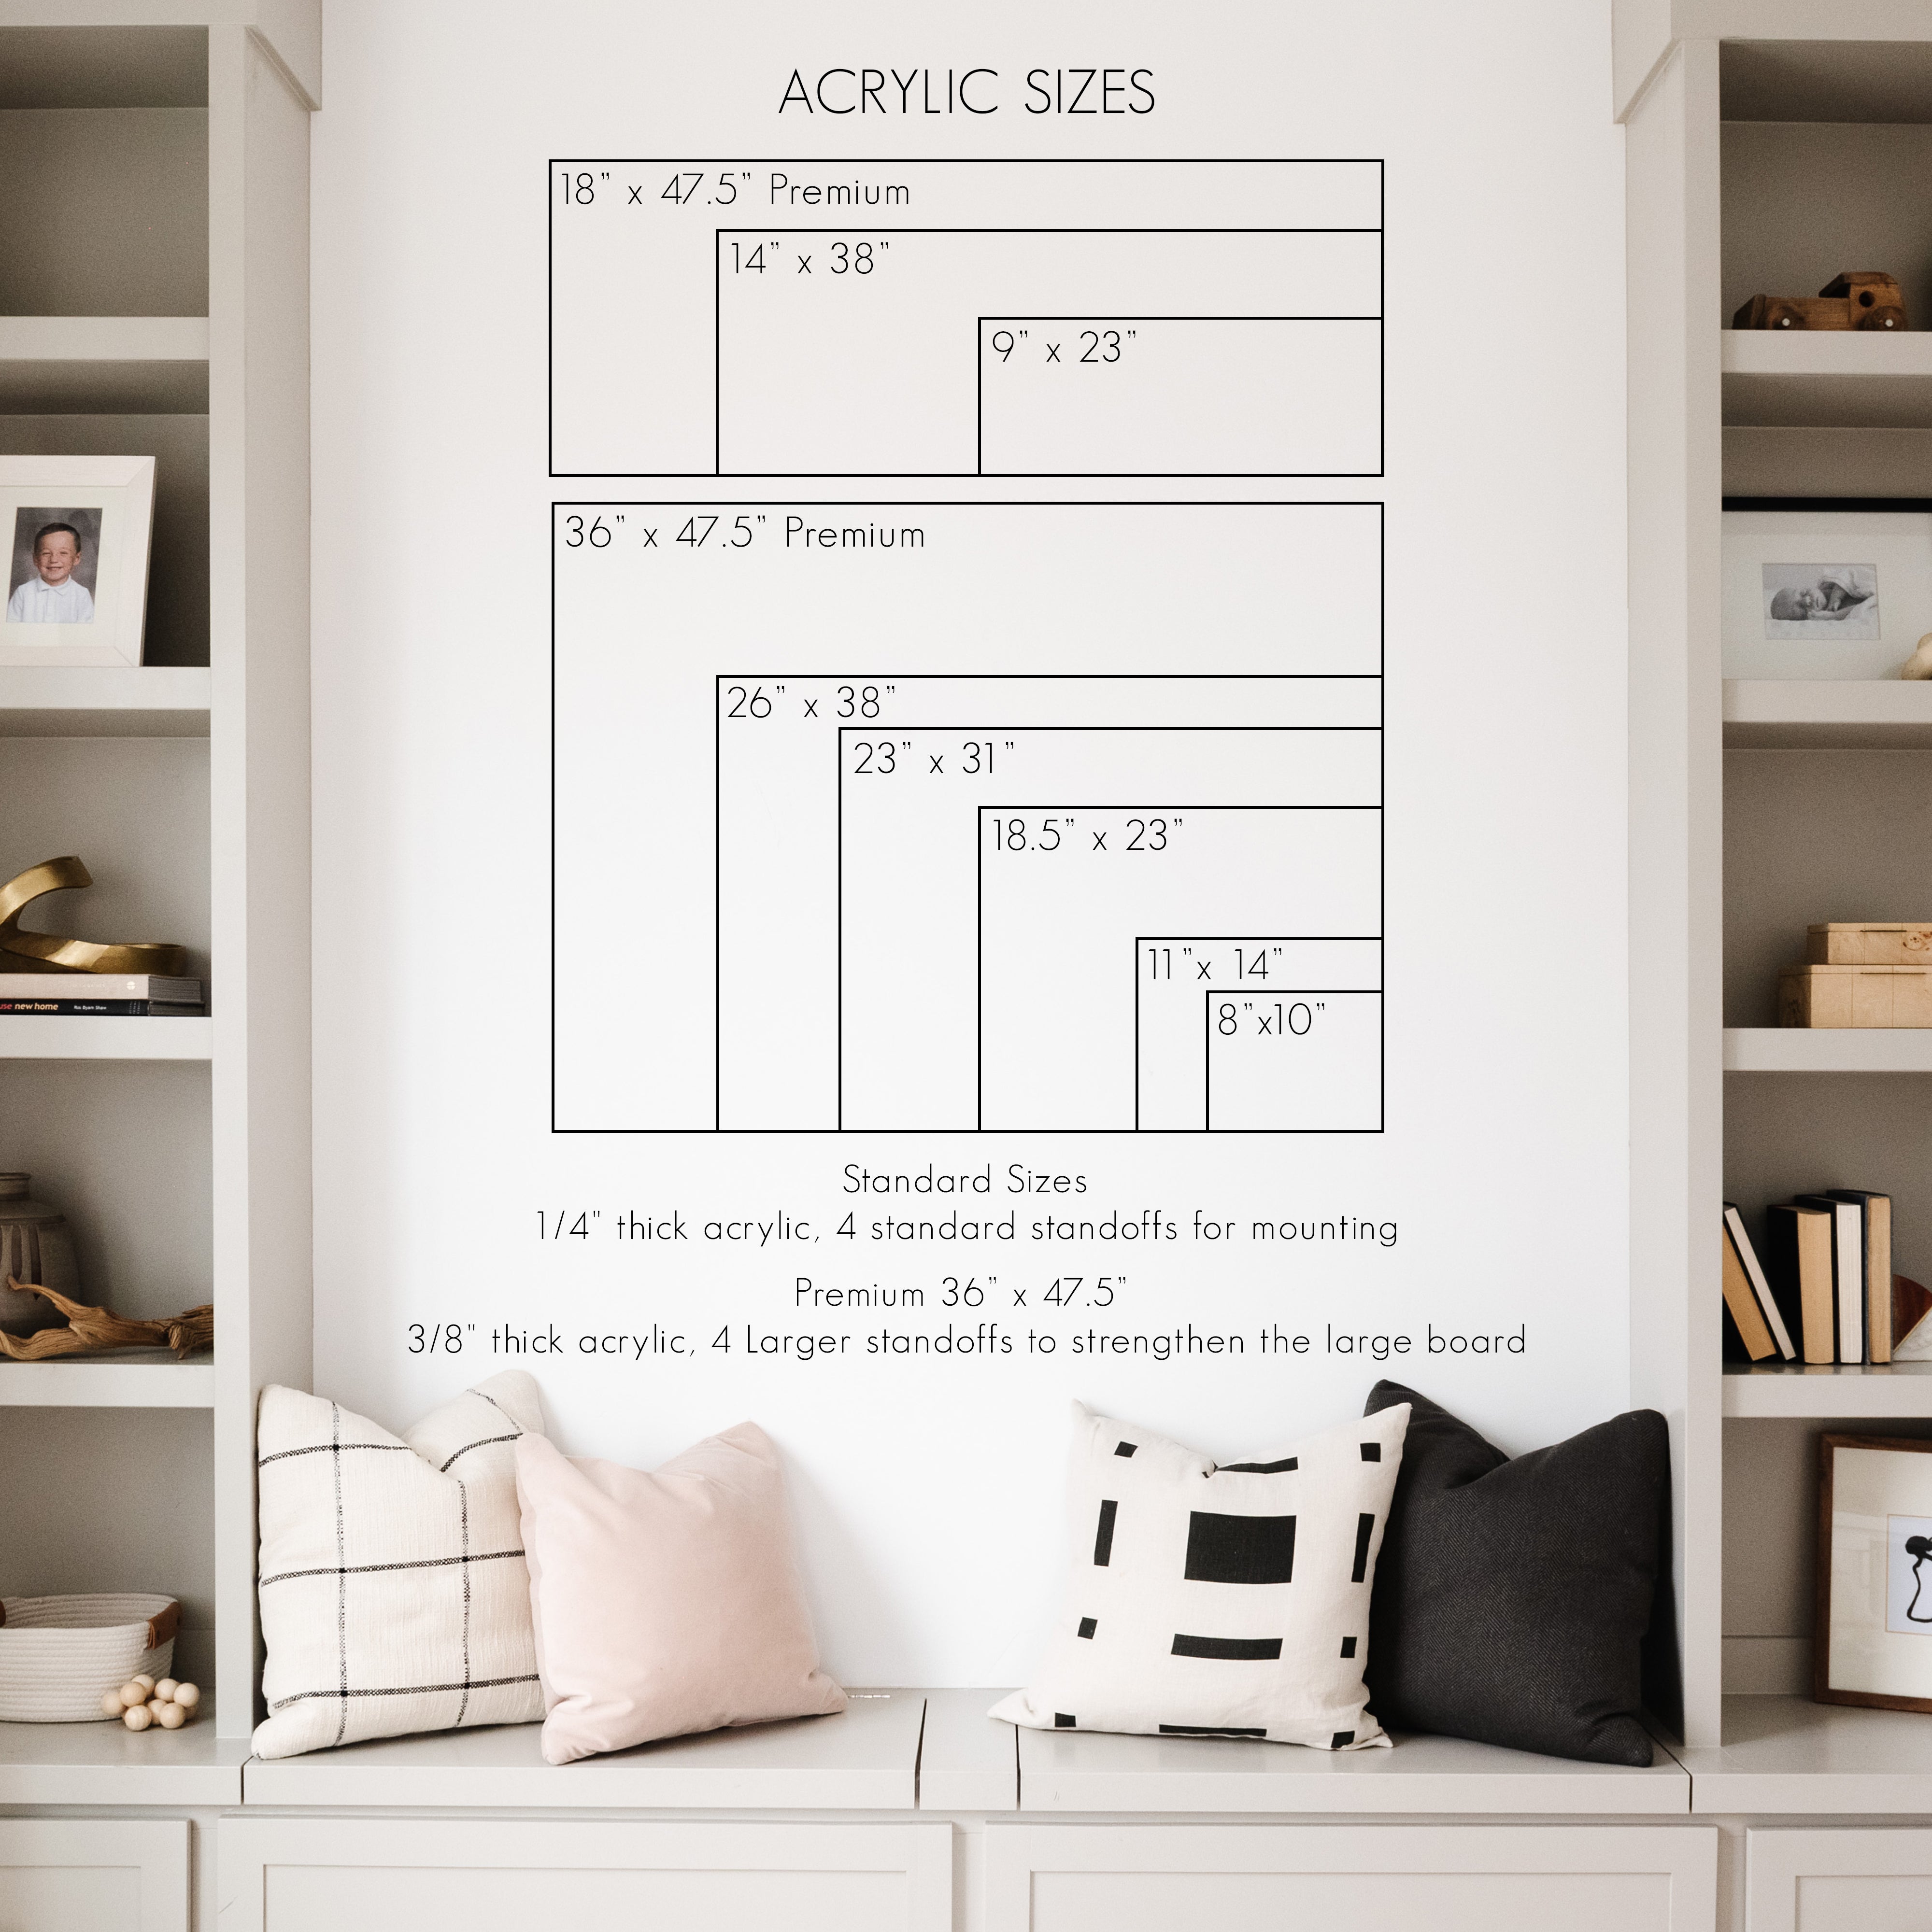 Week & Month Frosted Acrylic Calendar + 6 Sections | Horizontal Pennington